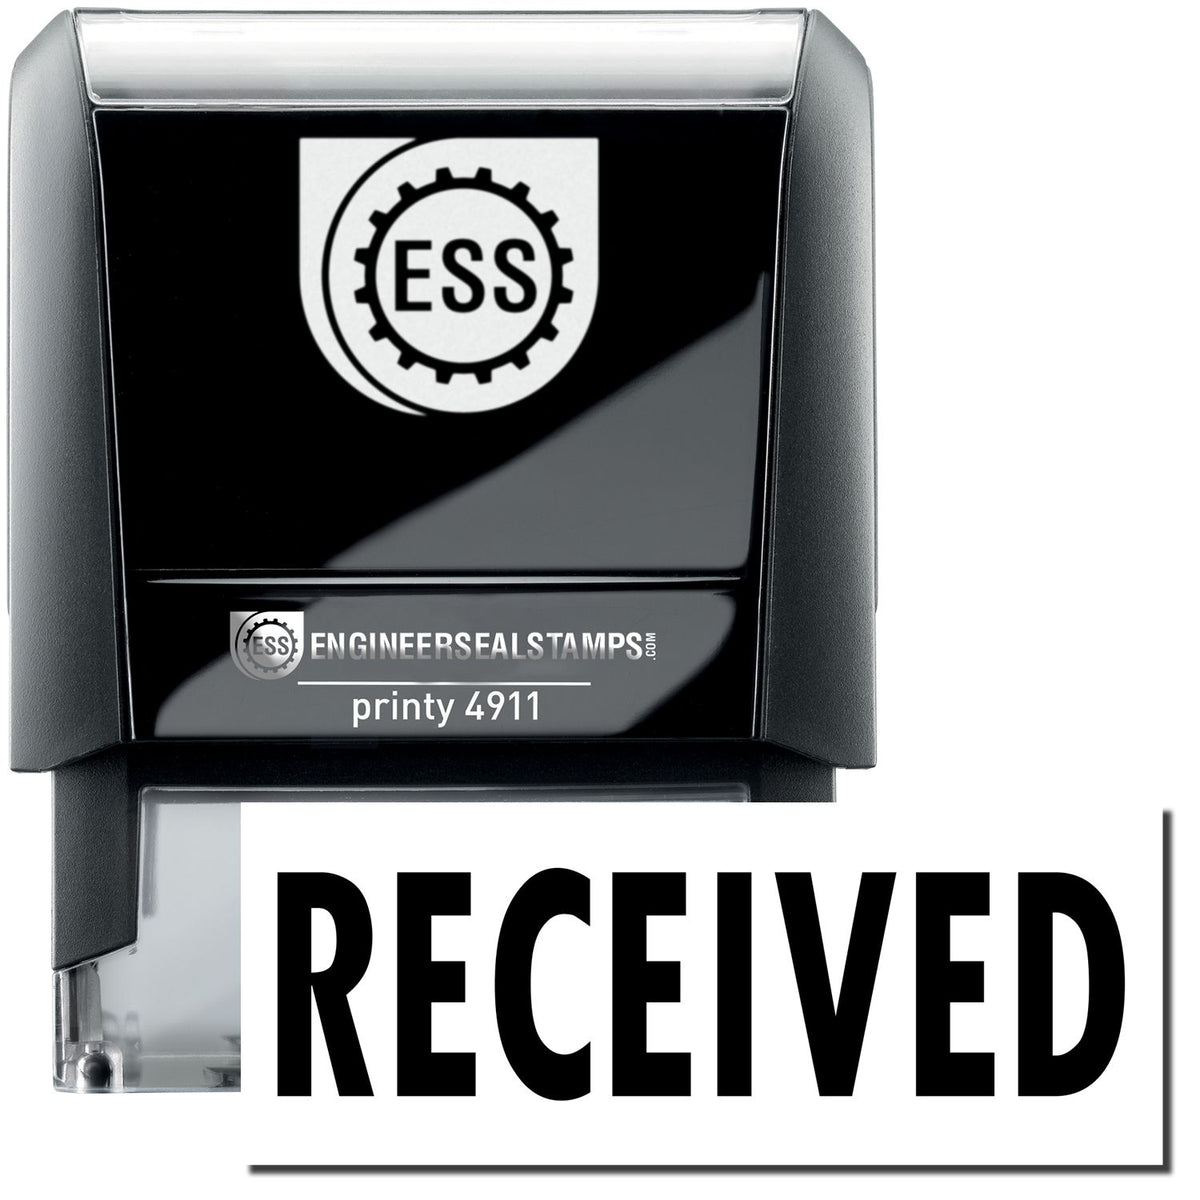 A self-inking stamp with a stamped image showing how the text &quot;RECEIVED&quot; is displayed after stamping.